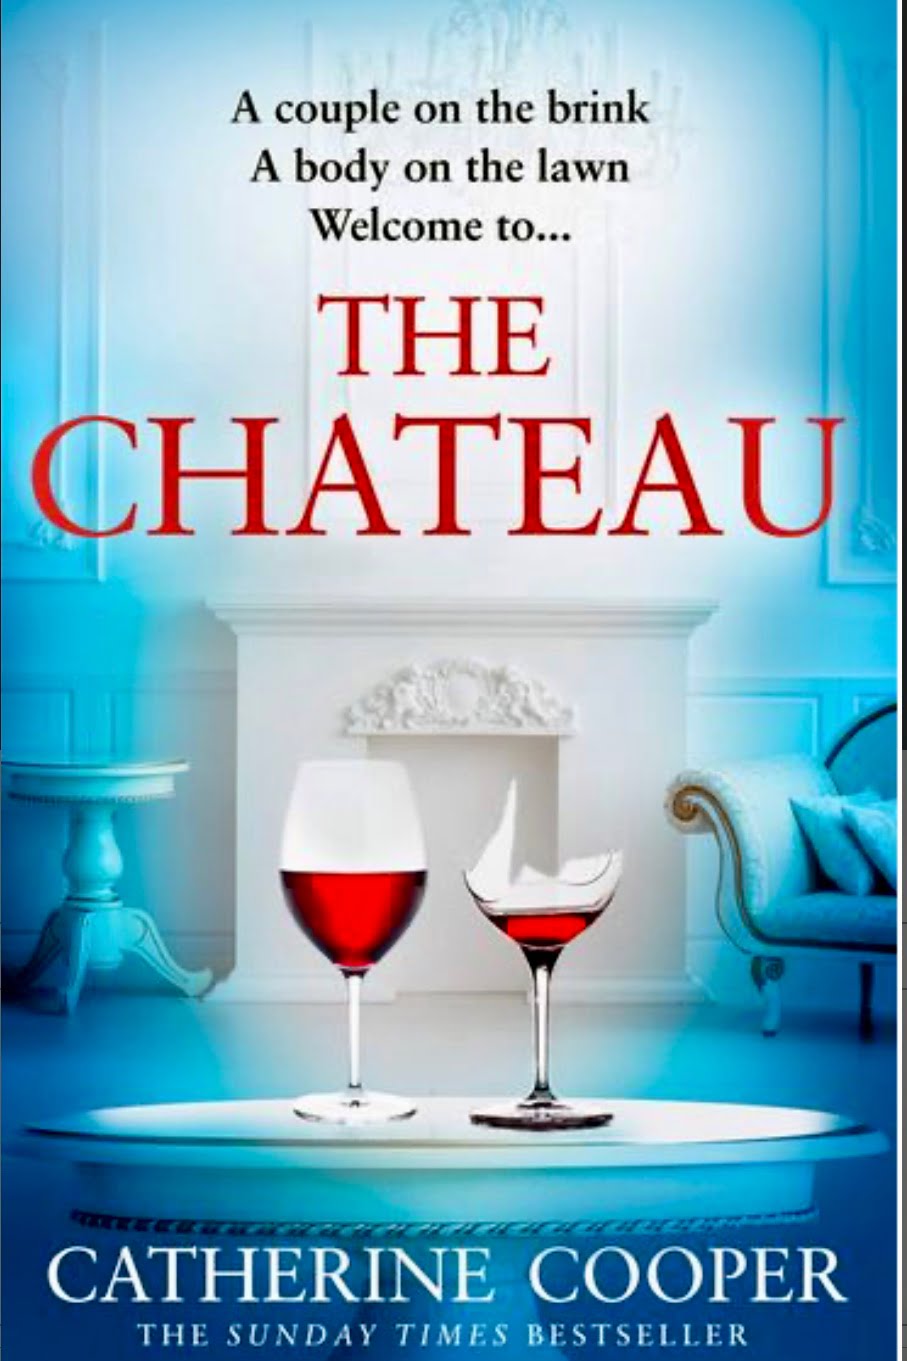 THE CHATEAU BY CATHERINE COOPER – BOOK REVIEW